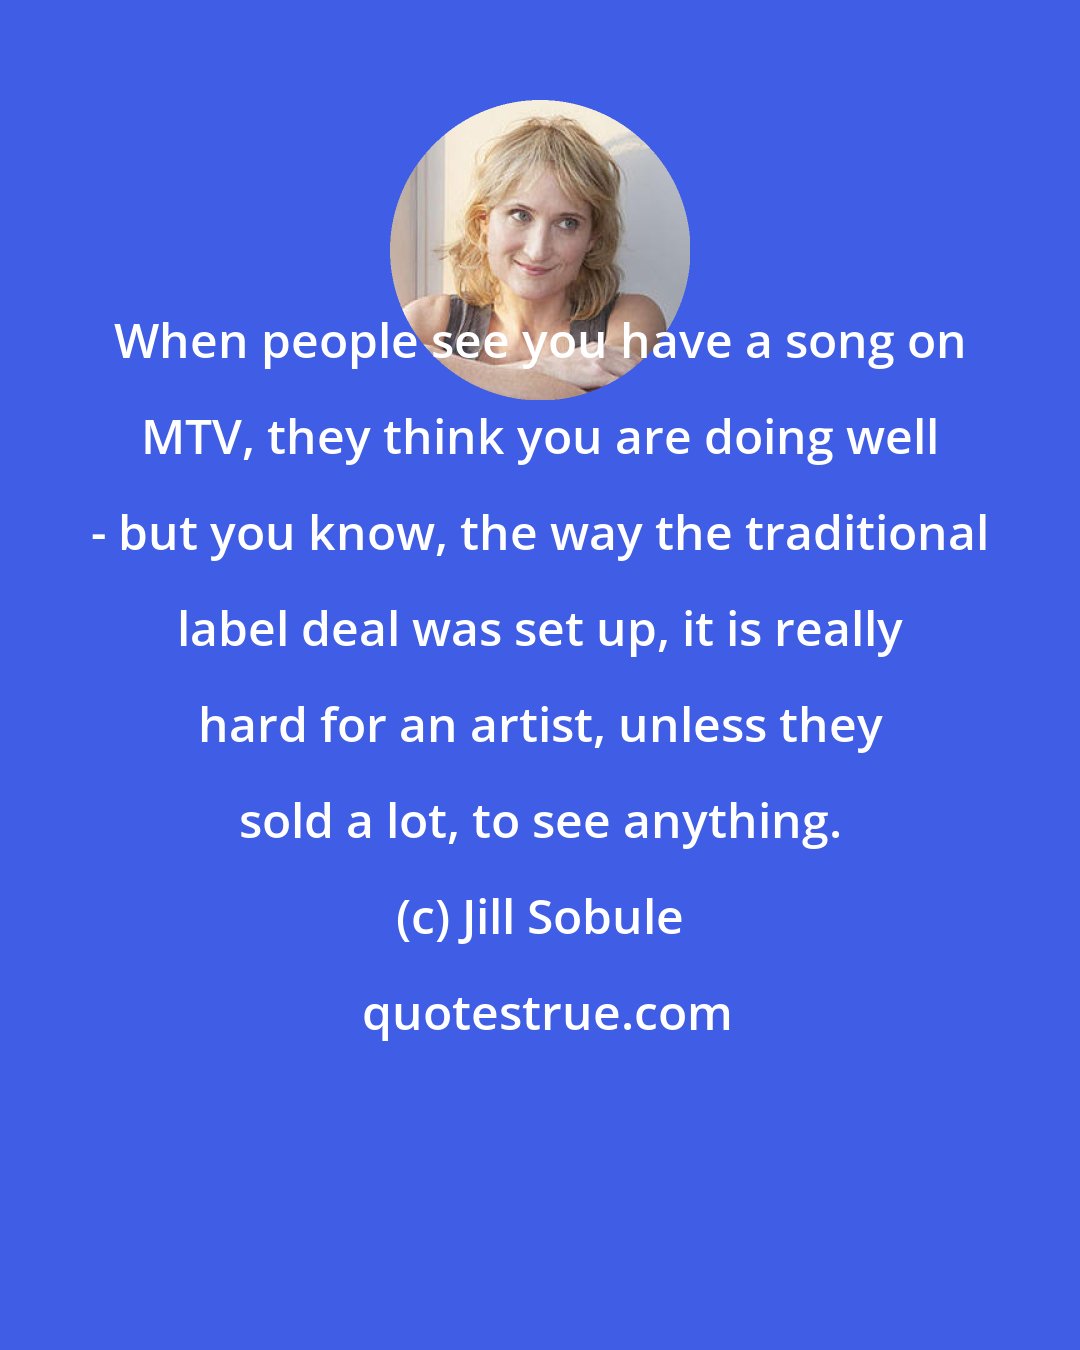 Jill Sobule: When people see you have a song on MTV, they think you are doing well - but you know, the way the traditional label deal was set up, it is really hard for an artist, unless they sold a lot, to see anything.